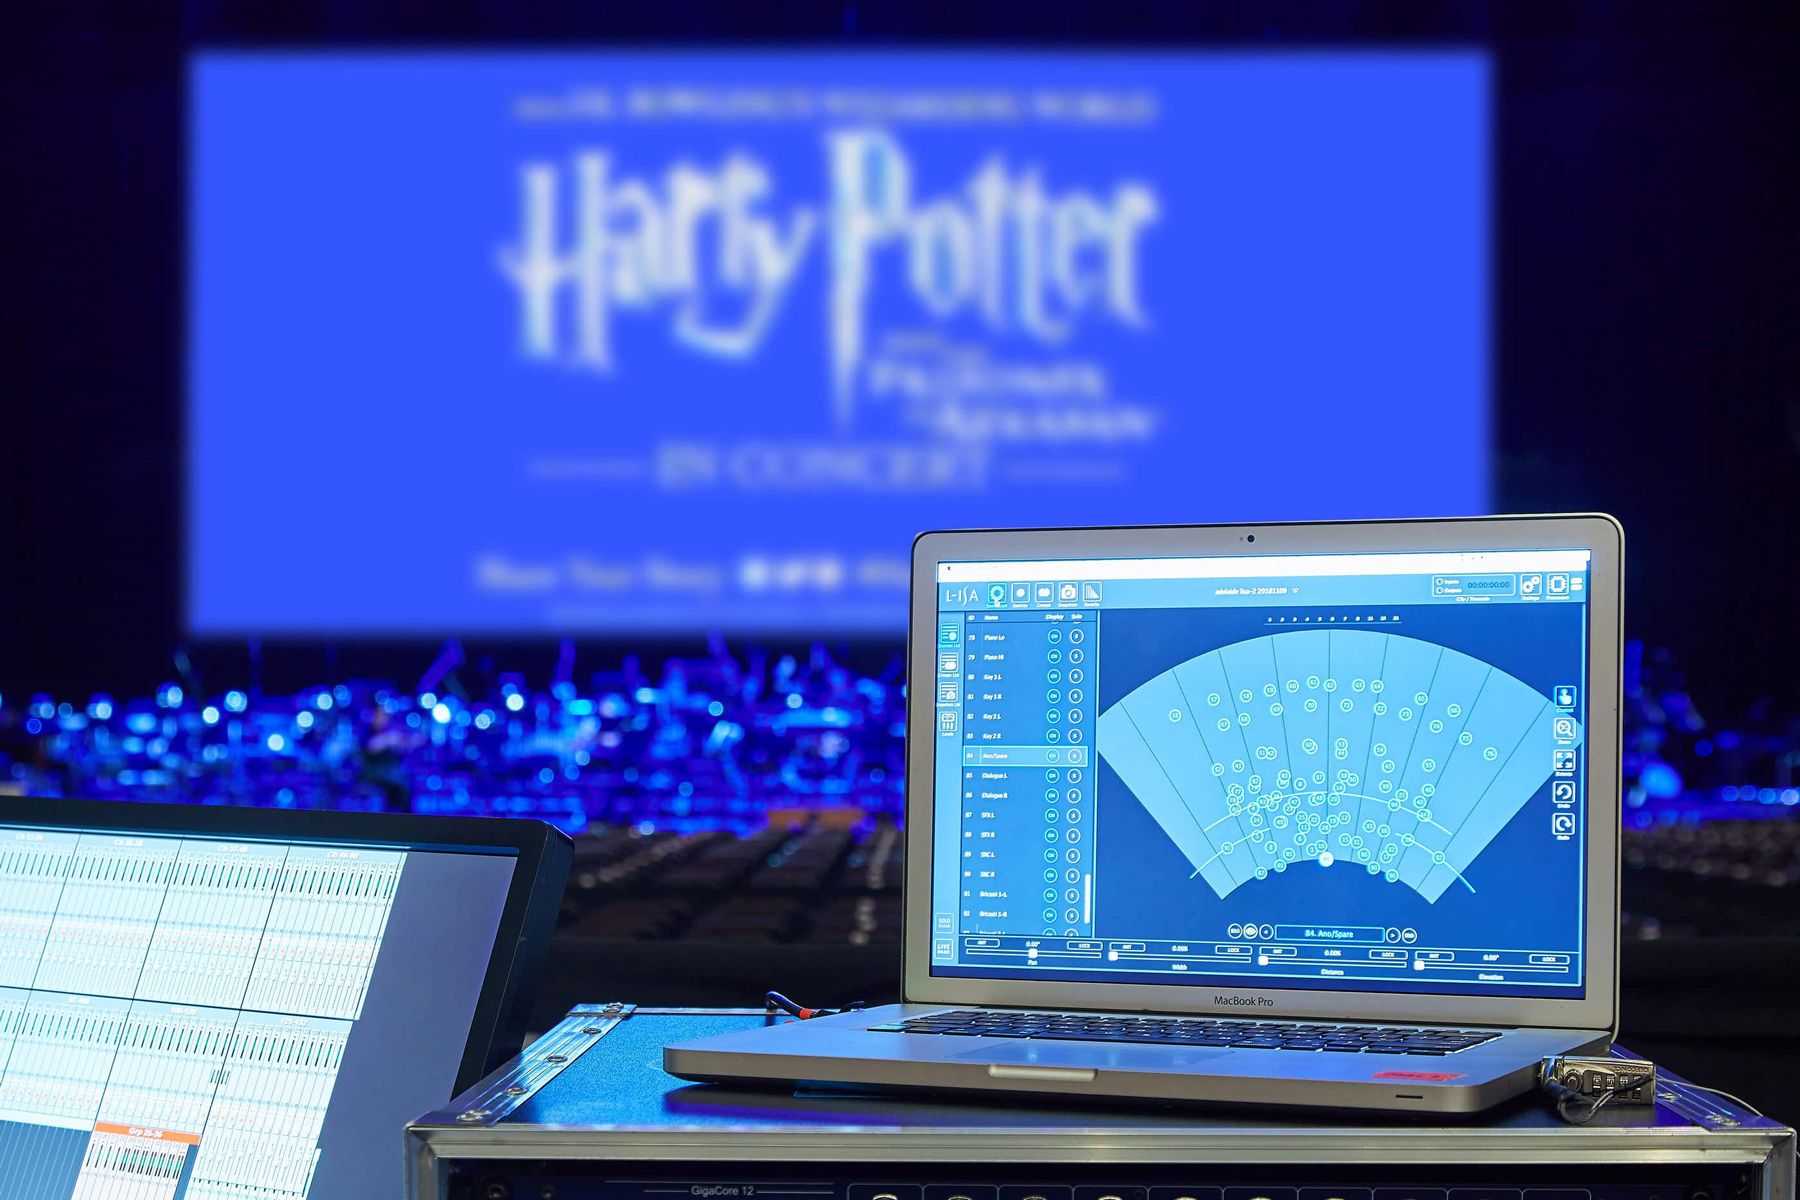 Southern Hemisphere first as L-ISA Hyperreal Sound technology is used for Harry Potter and the Prisoner of Azkaban™ in Concert live performance